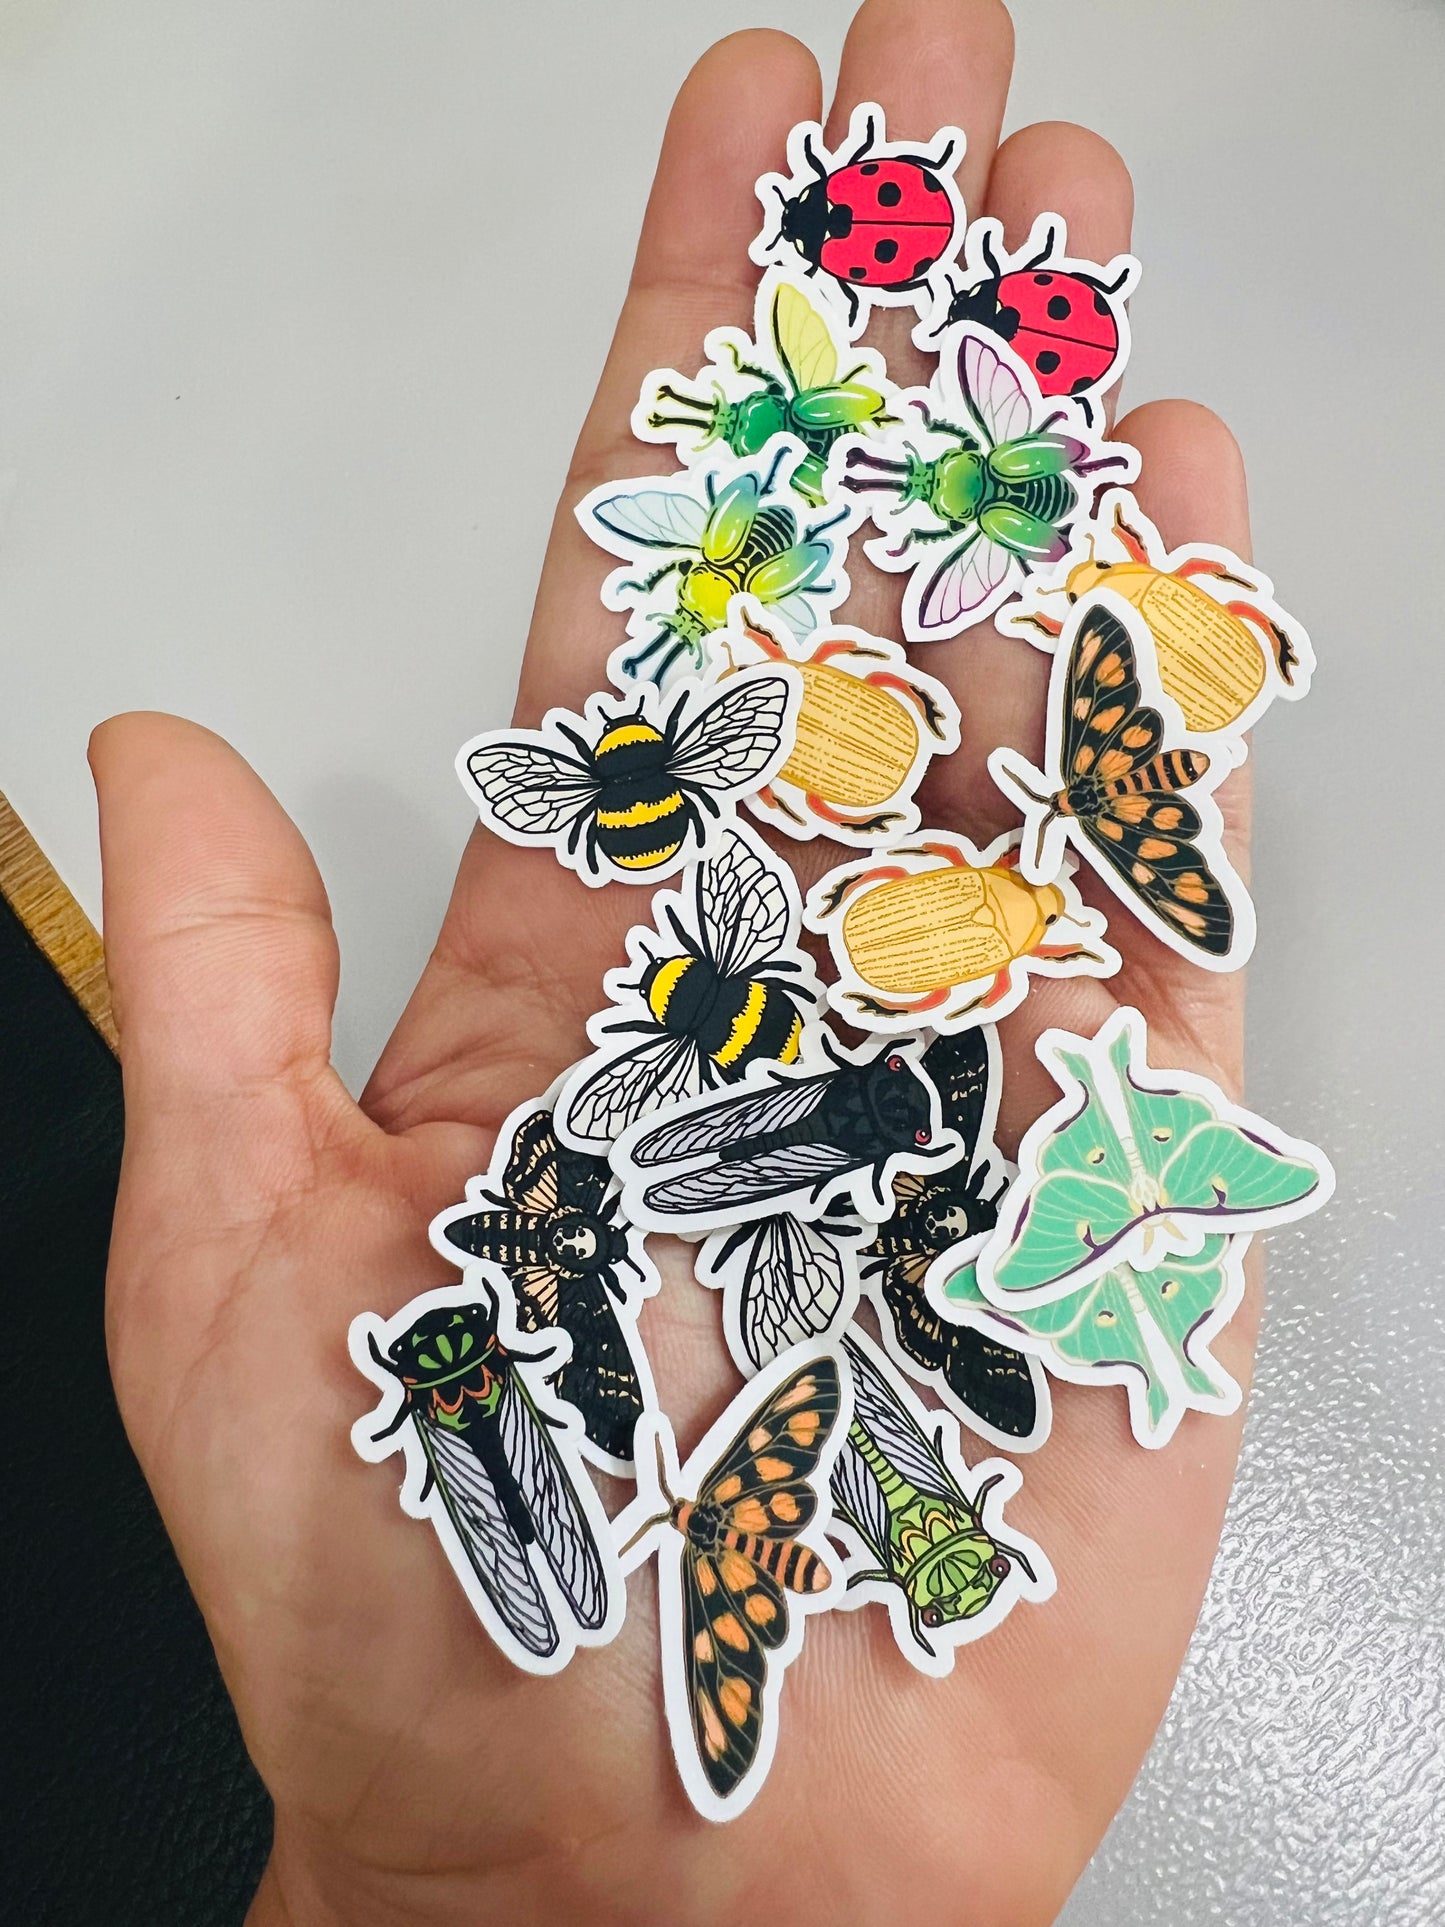 Mini insect stickers - 20 stickers